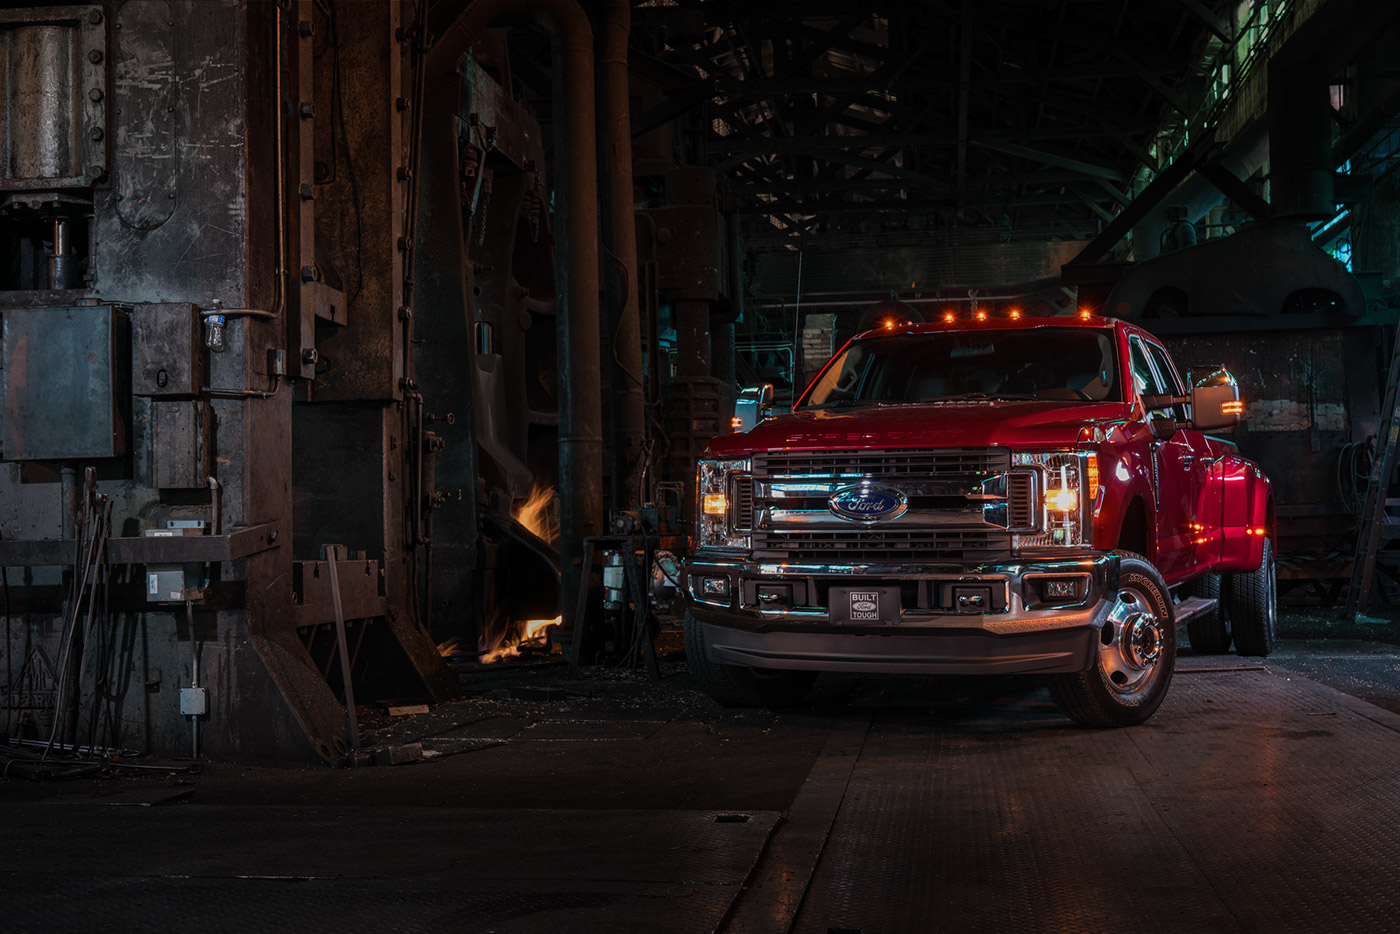 motortrend Ford superduty tough industrial foundry forge Photography  Advertising  editorial